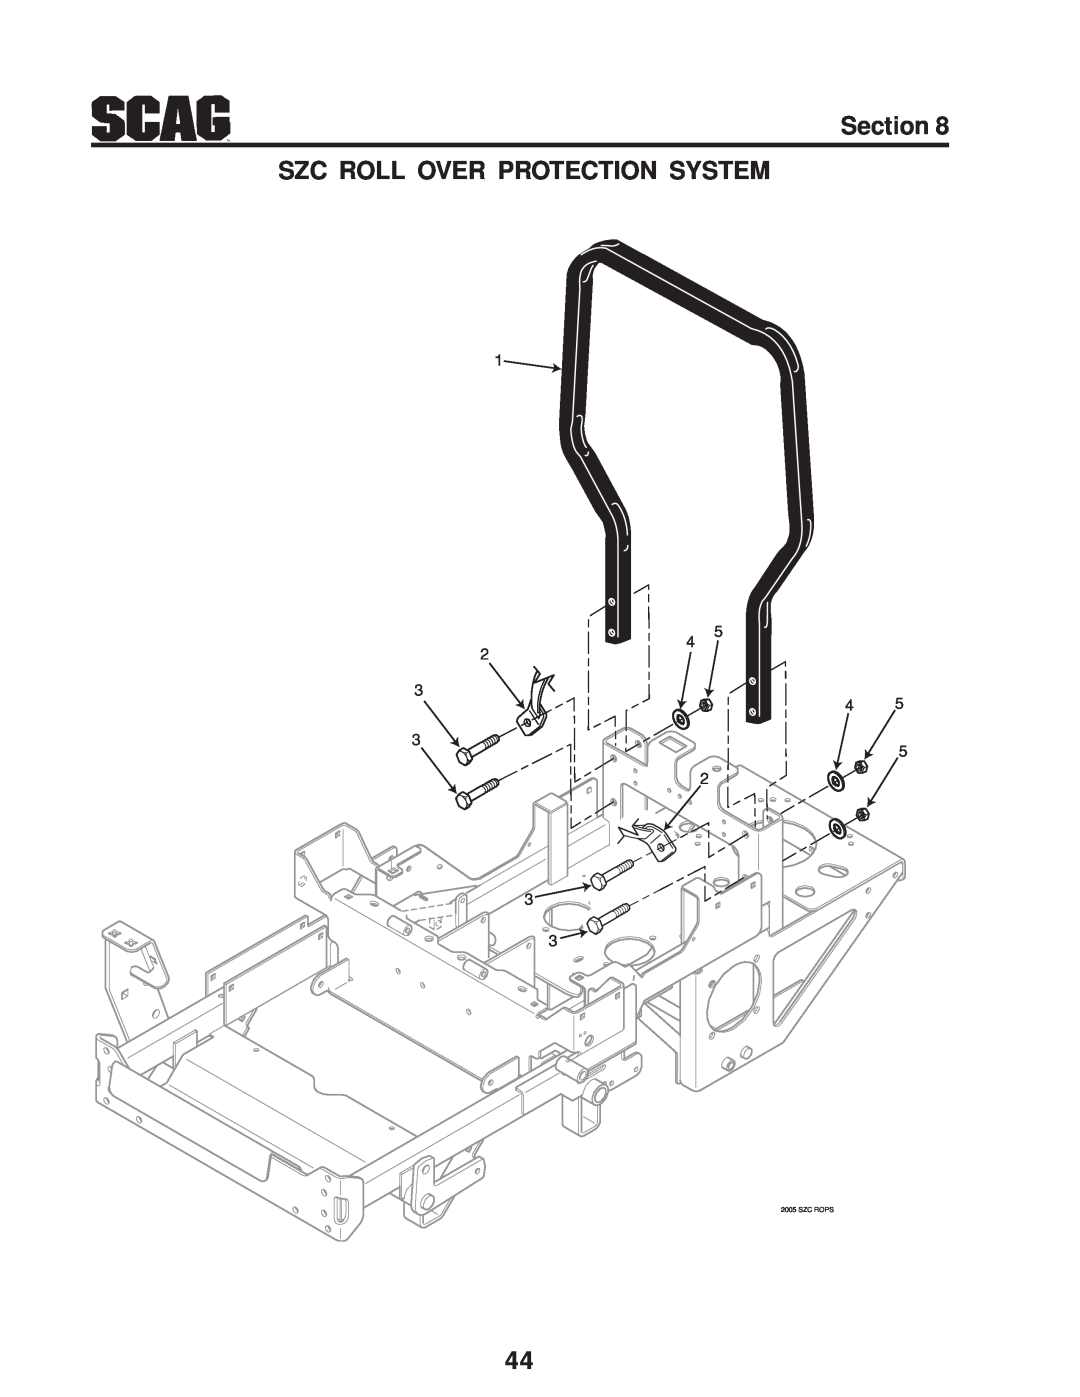 Scag Power Equipment manual Section SZC ROLL OVER PROTECTION SYSTEM, Szc Rops 